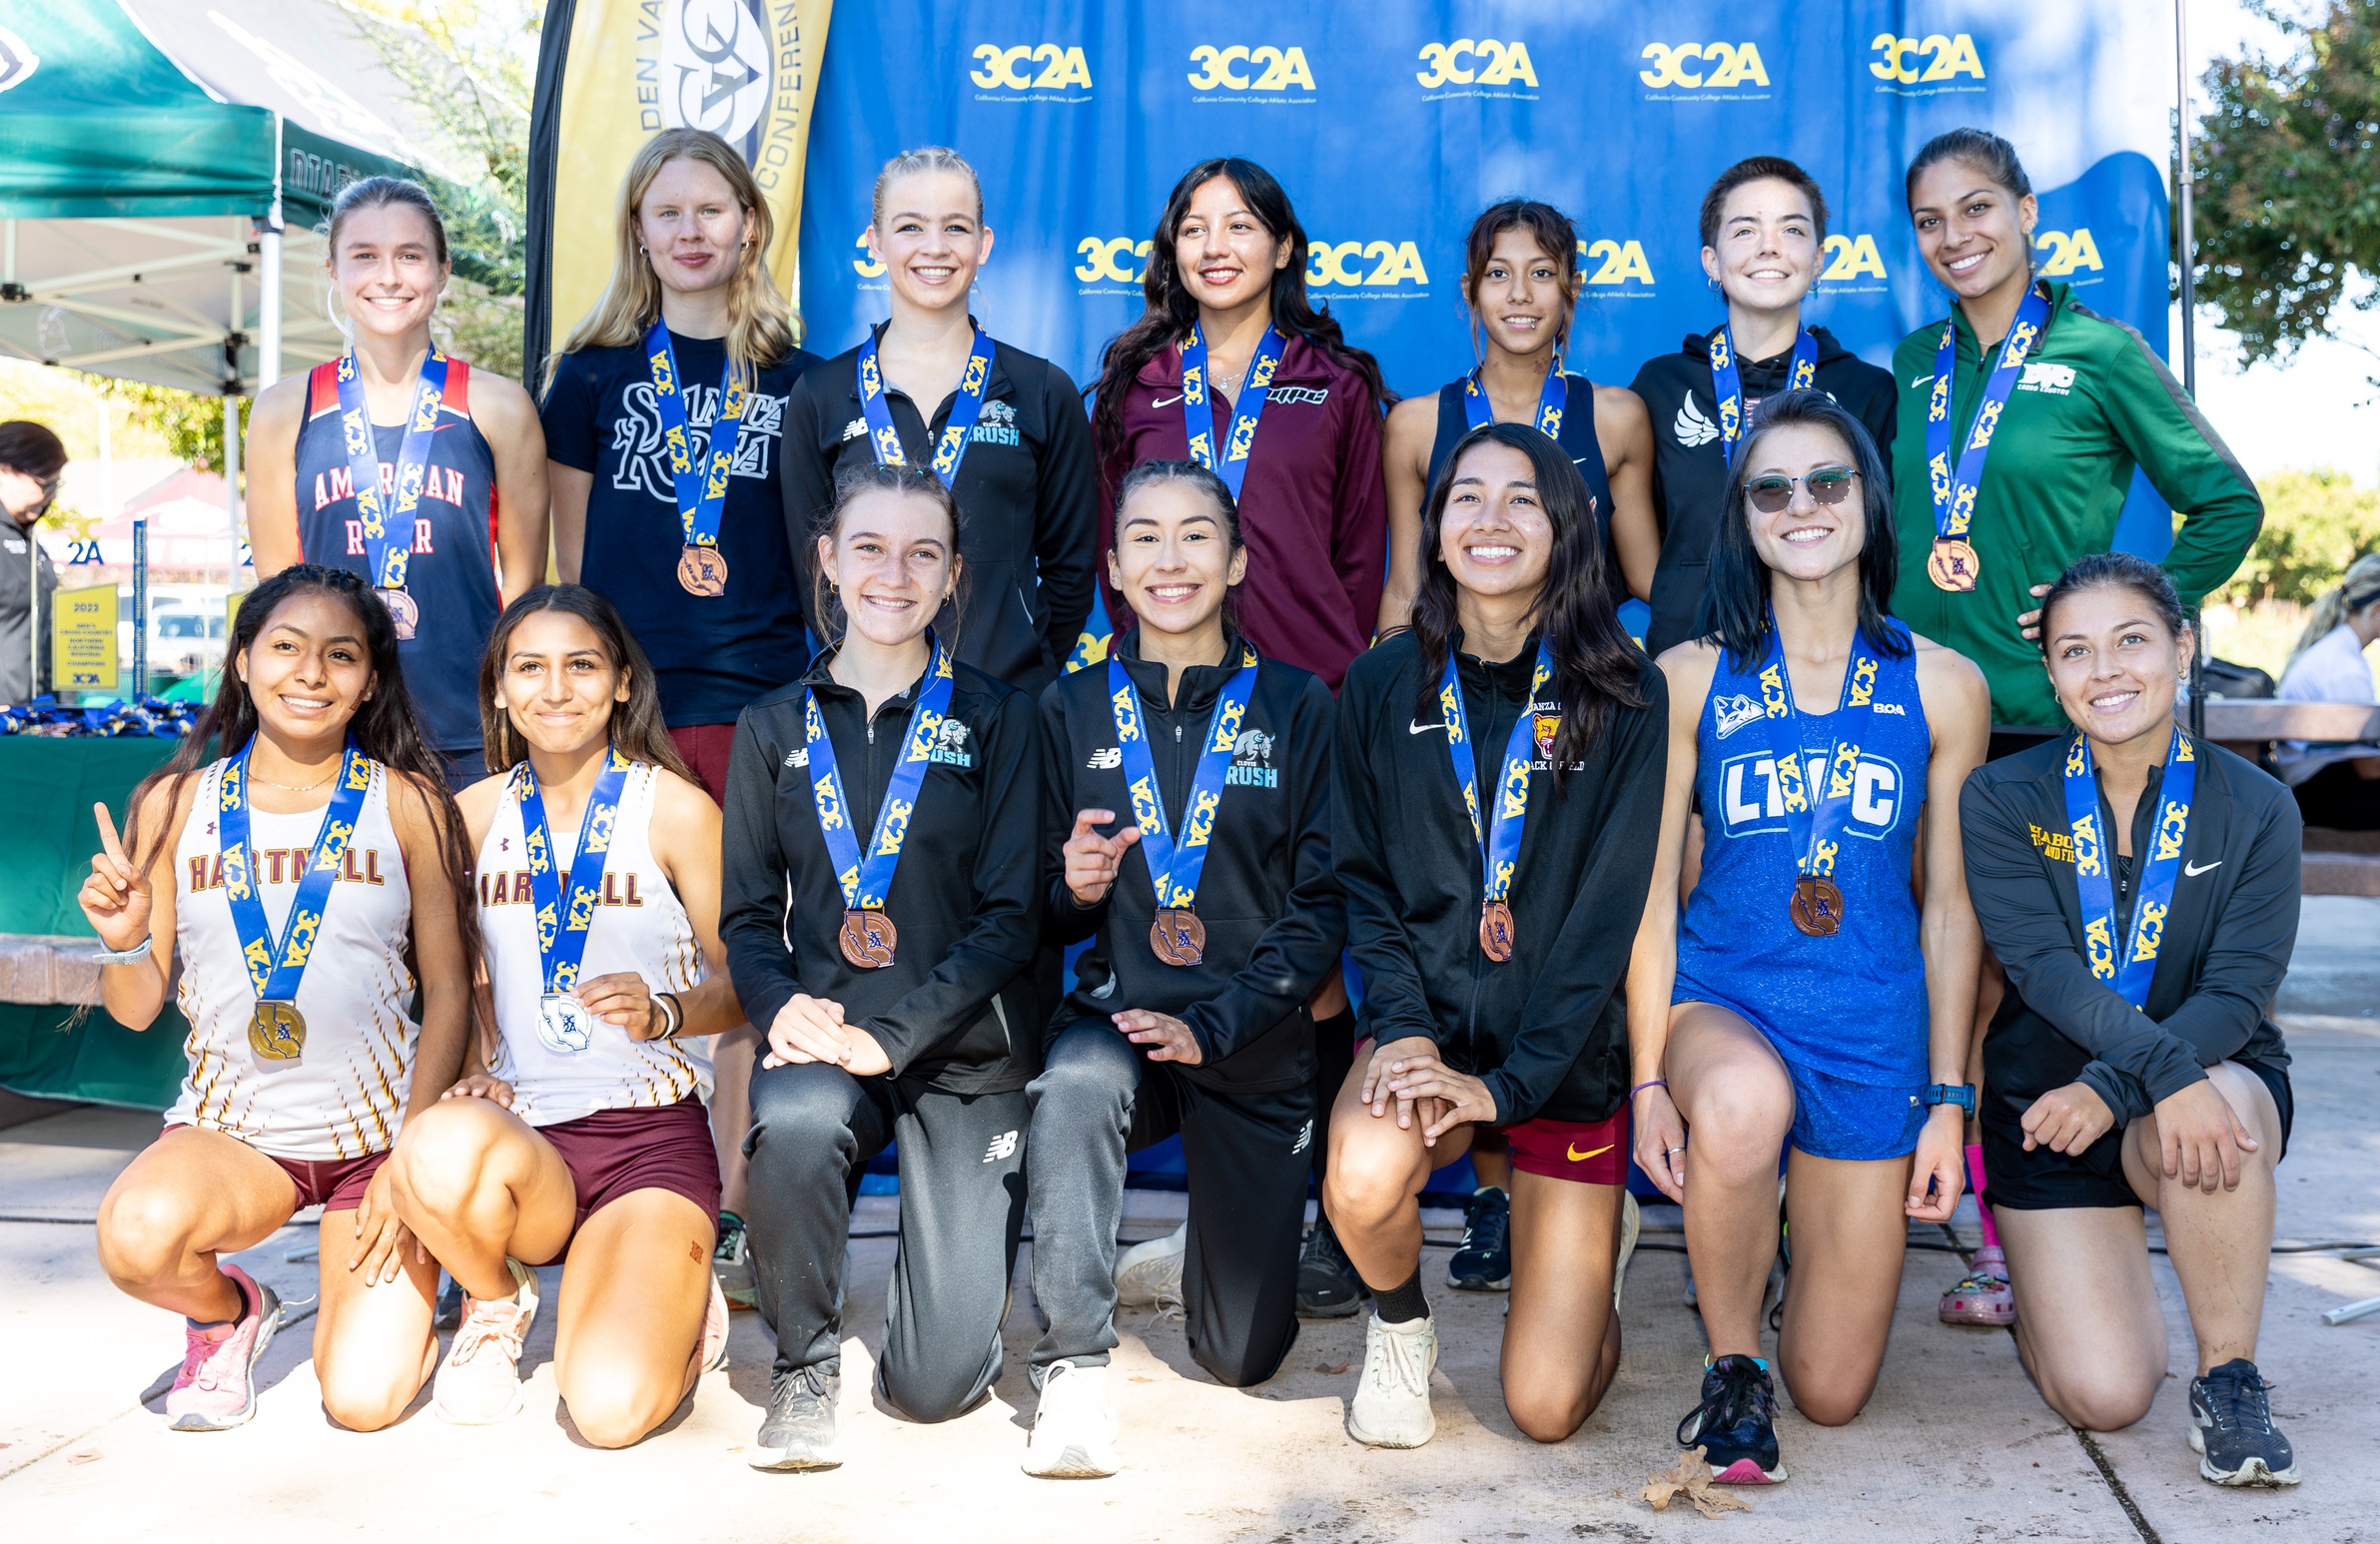 Women's Cross Country finish 7th, Sevier 12th, in NorCal Championships, qualify for State